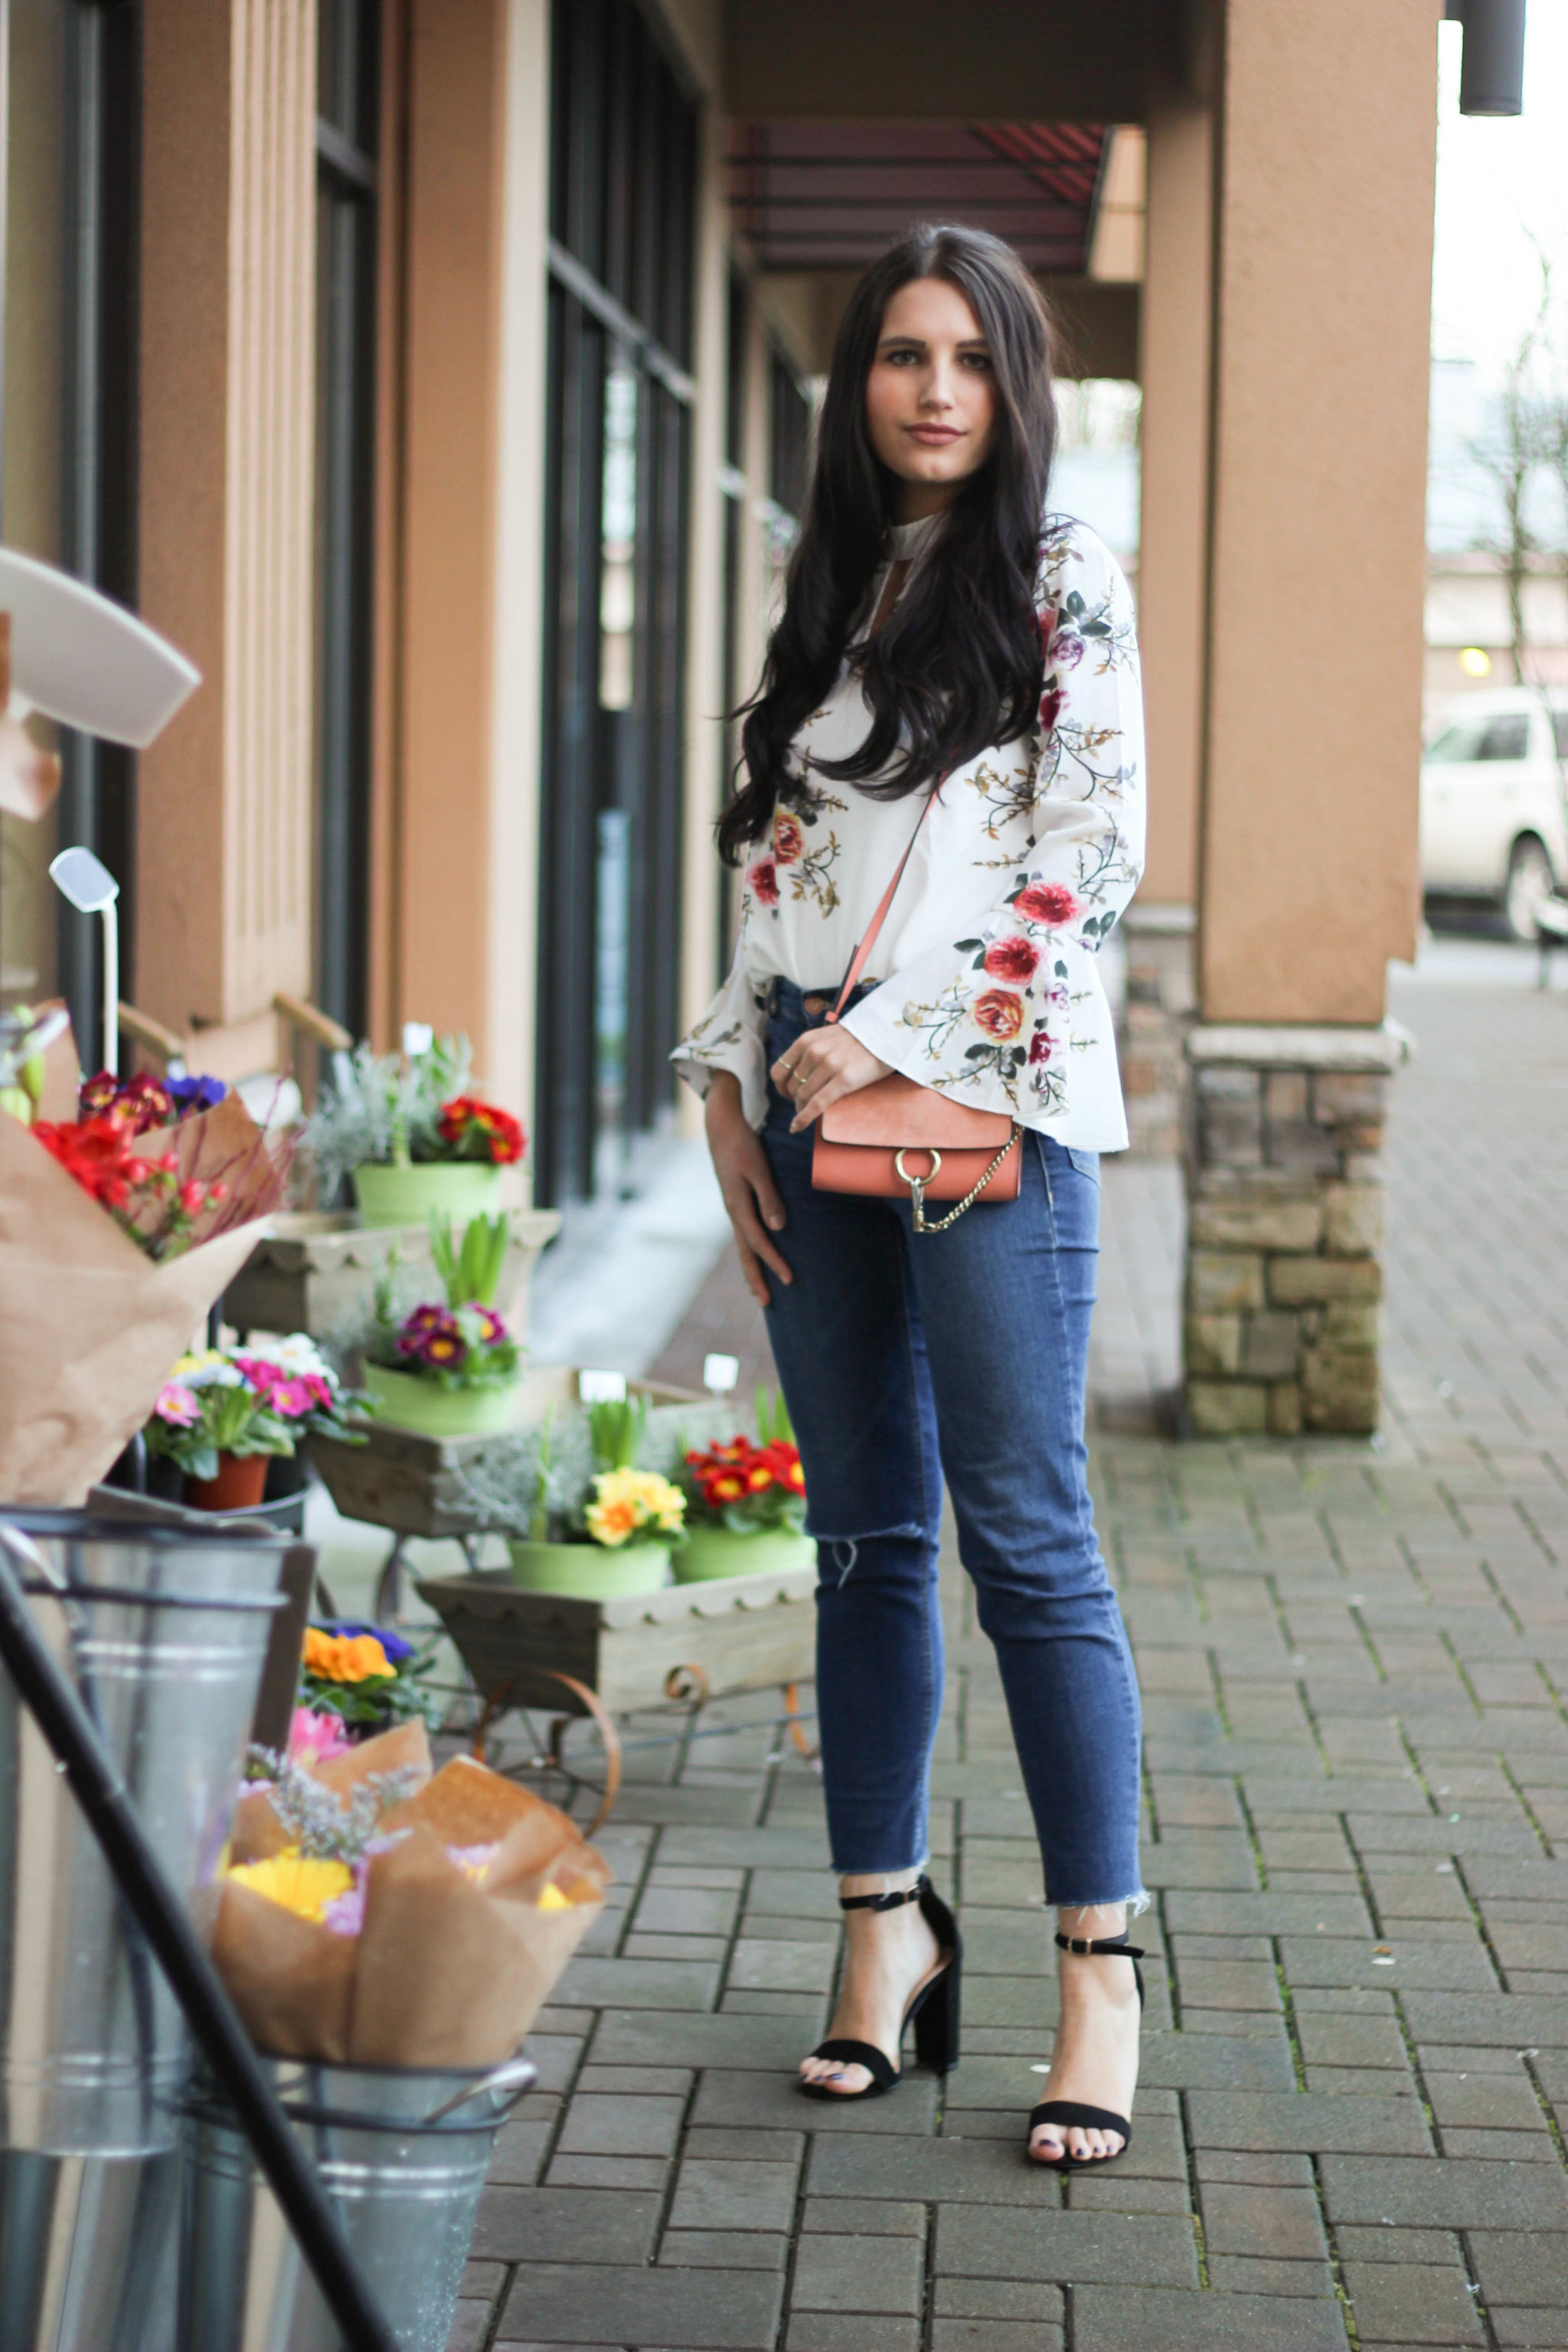 transitioning-into-spring-with-florals